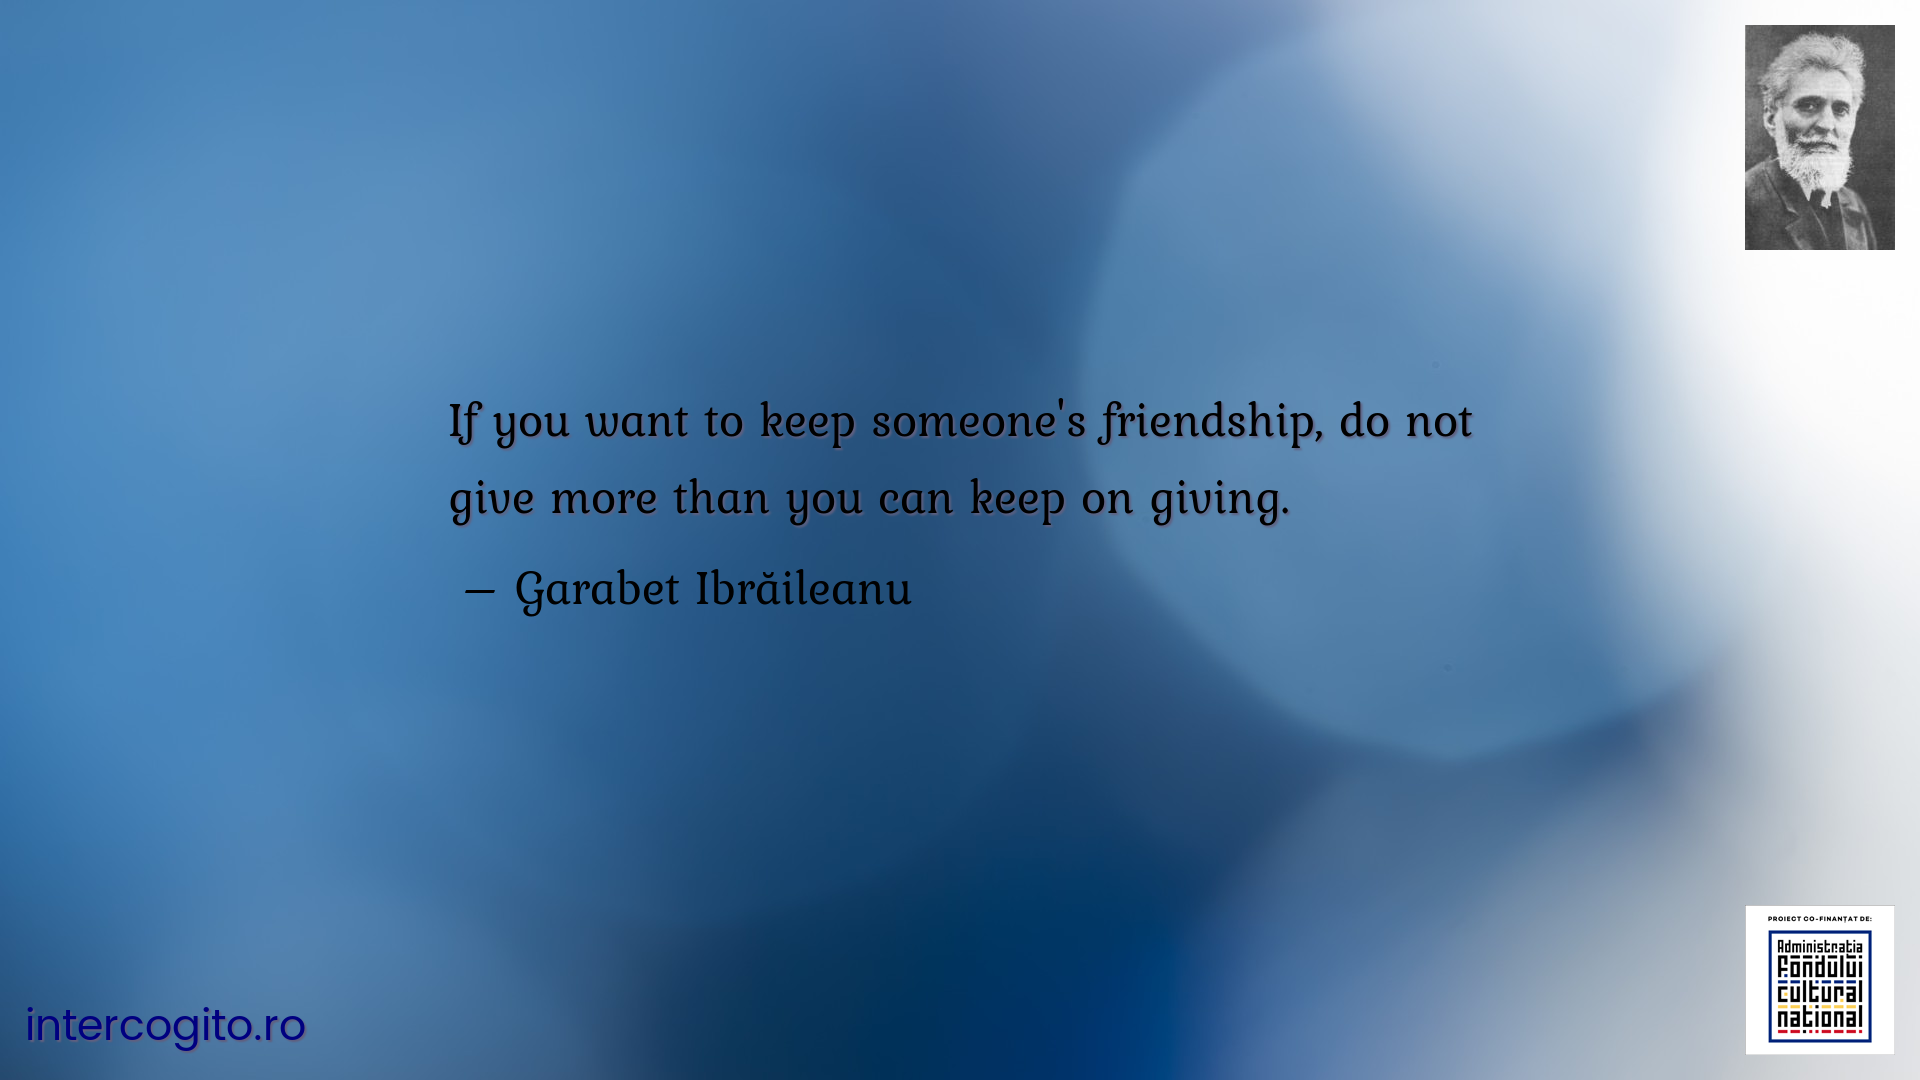 If you want to keep someone's friendship, do not give more than you can keep on giving.